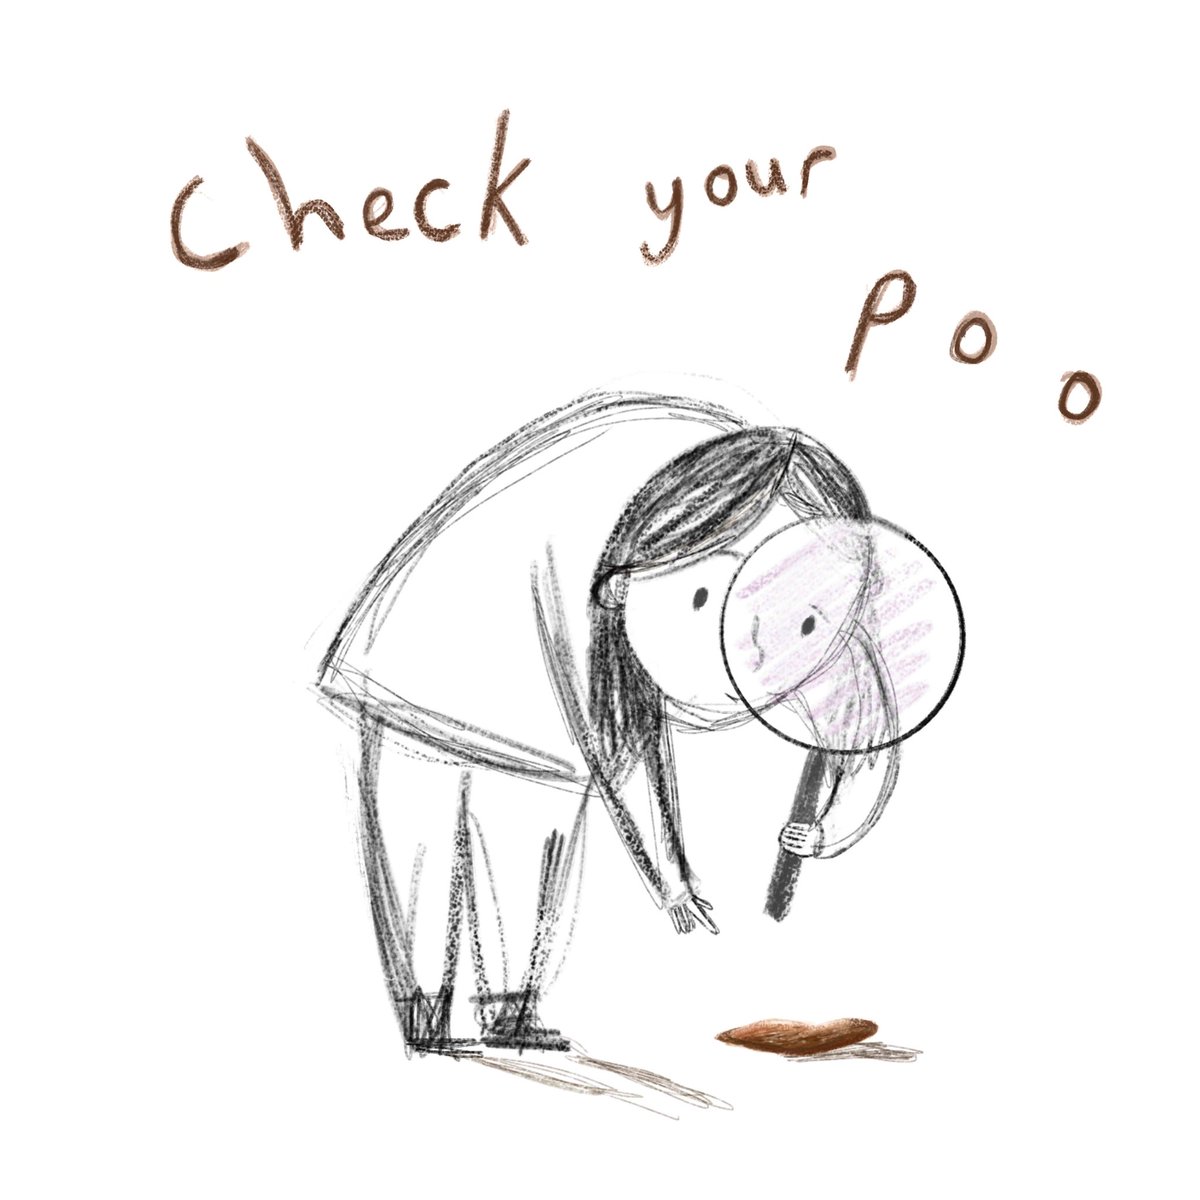 I think this is the most important thing I can say today. #bowelbabe #checkyourpoo